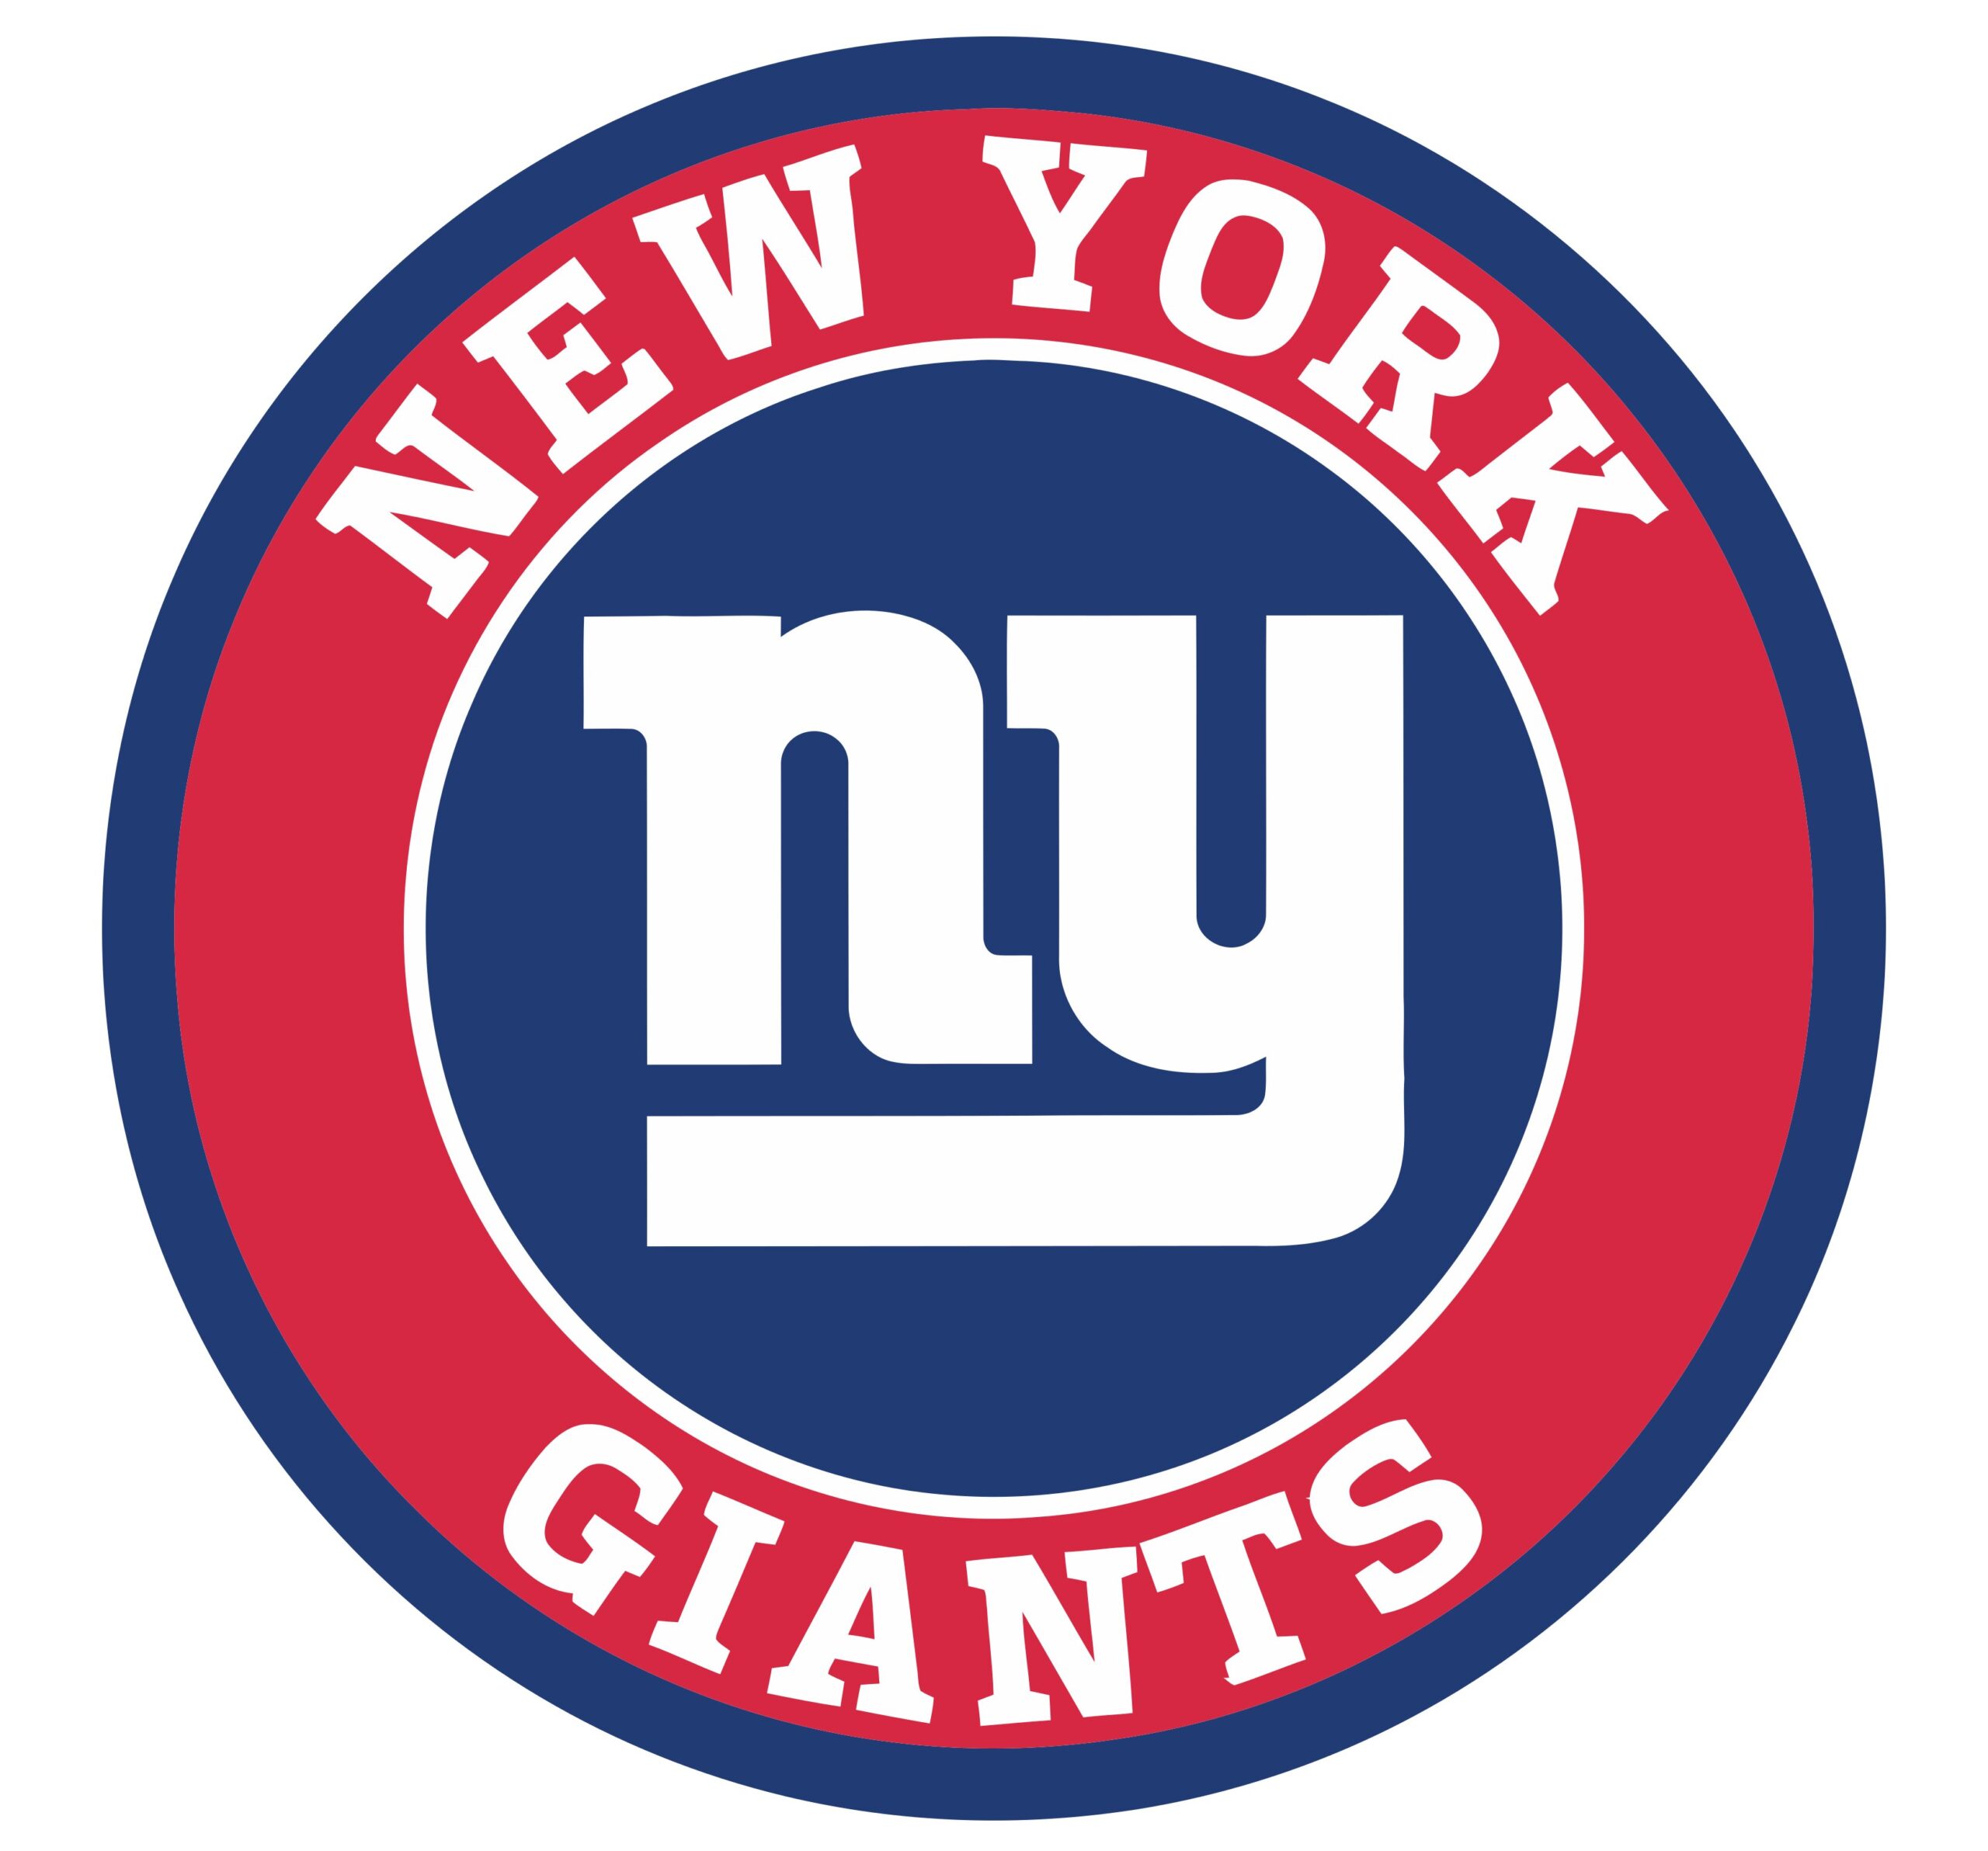 Breaking: Giants desperately need to redeem their status as they set to land in a 7th overall pick.